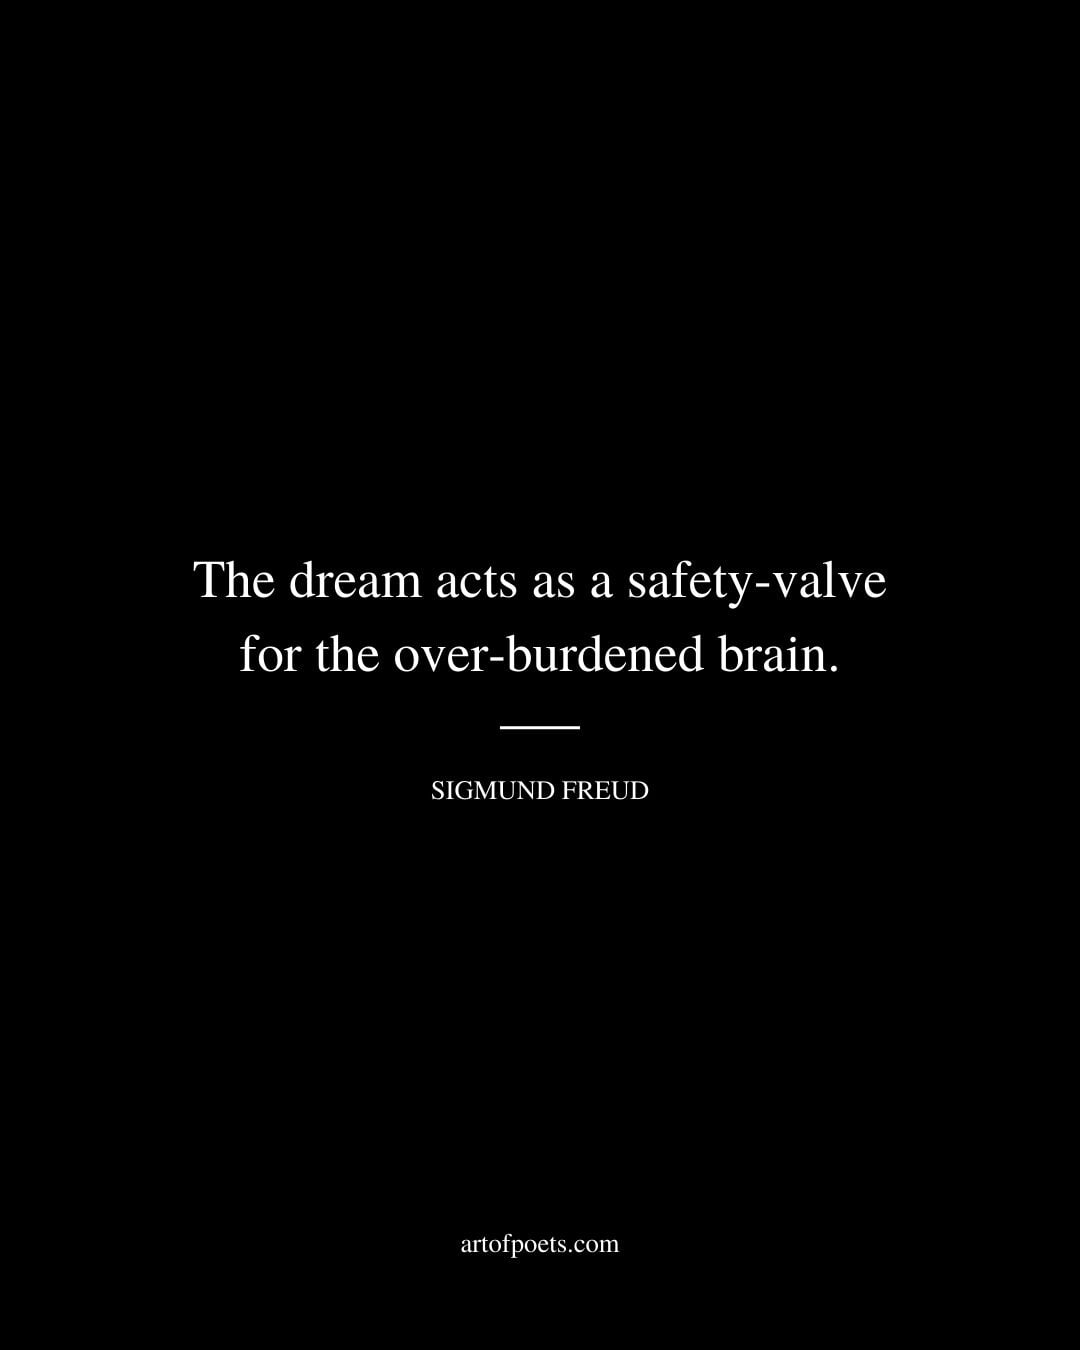 The dream acts as a safety valve for the over burdened brain